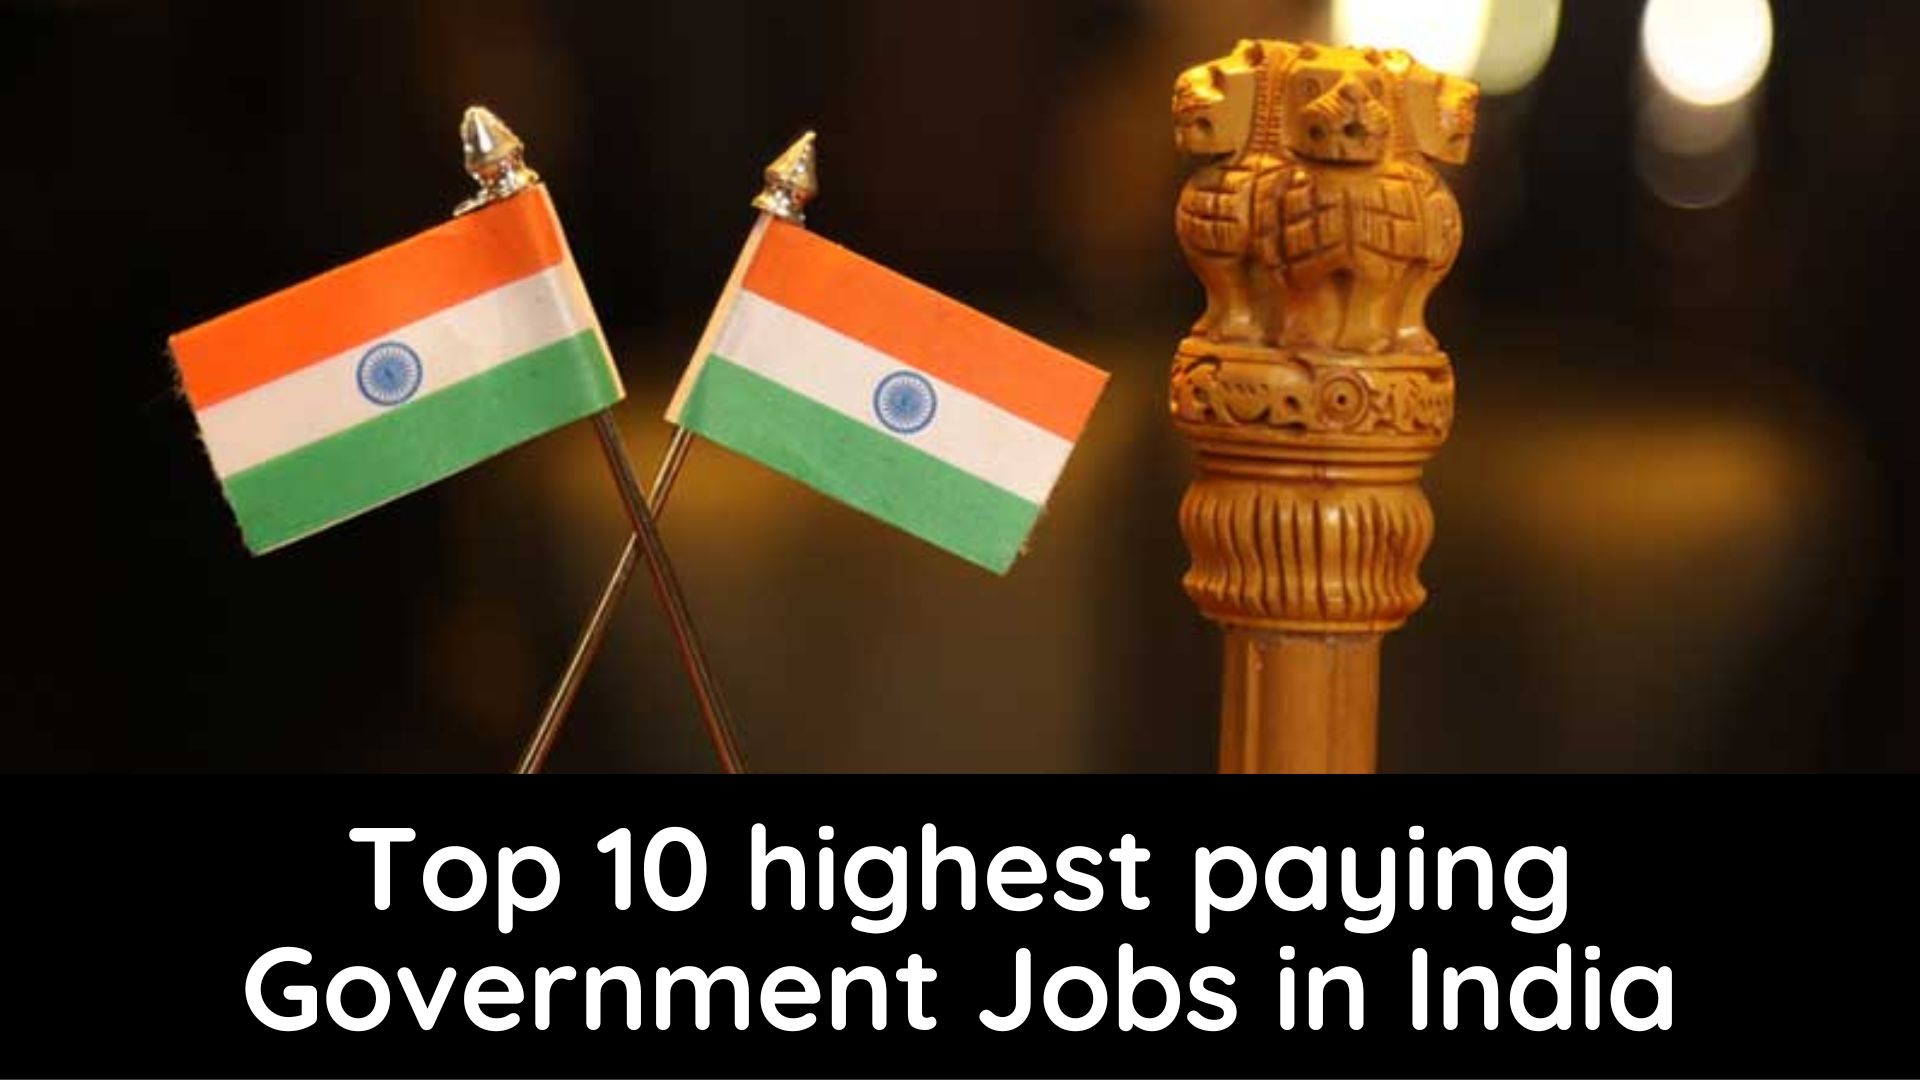 Top 10 highest paying Government Jobs in India